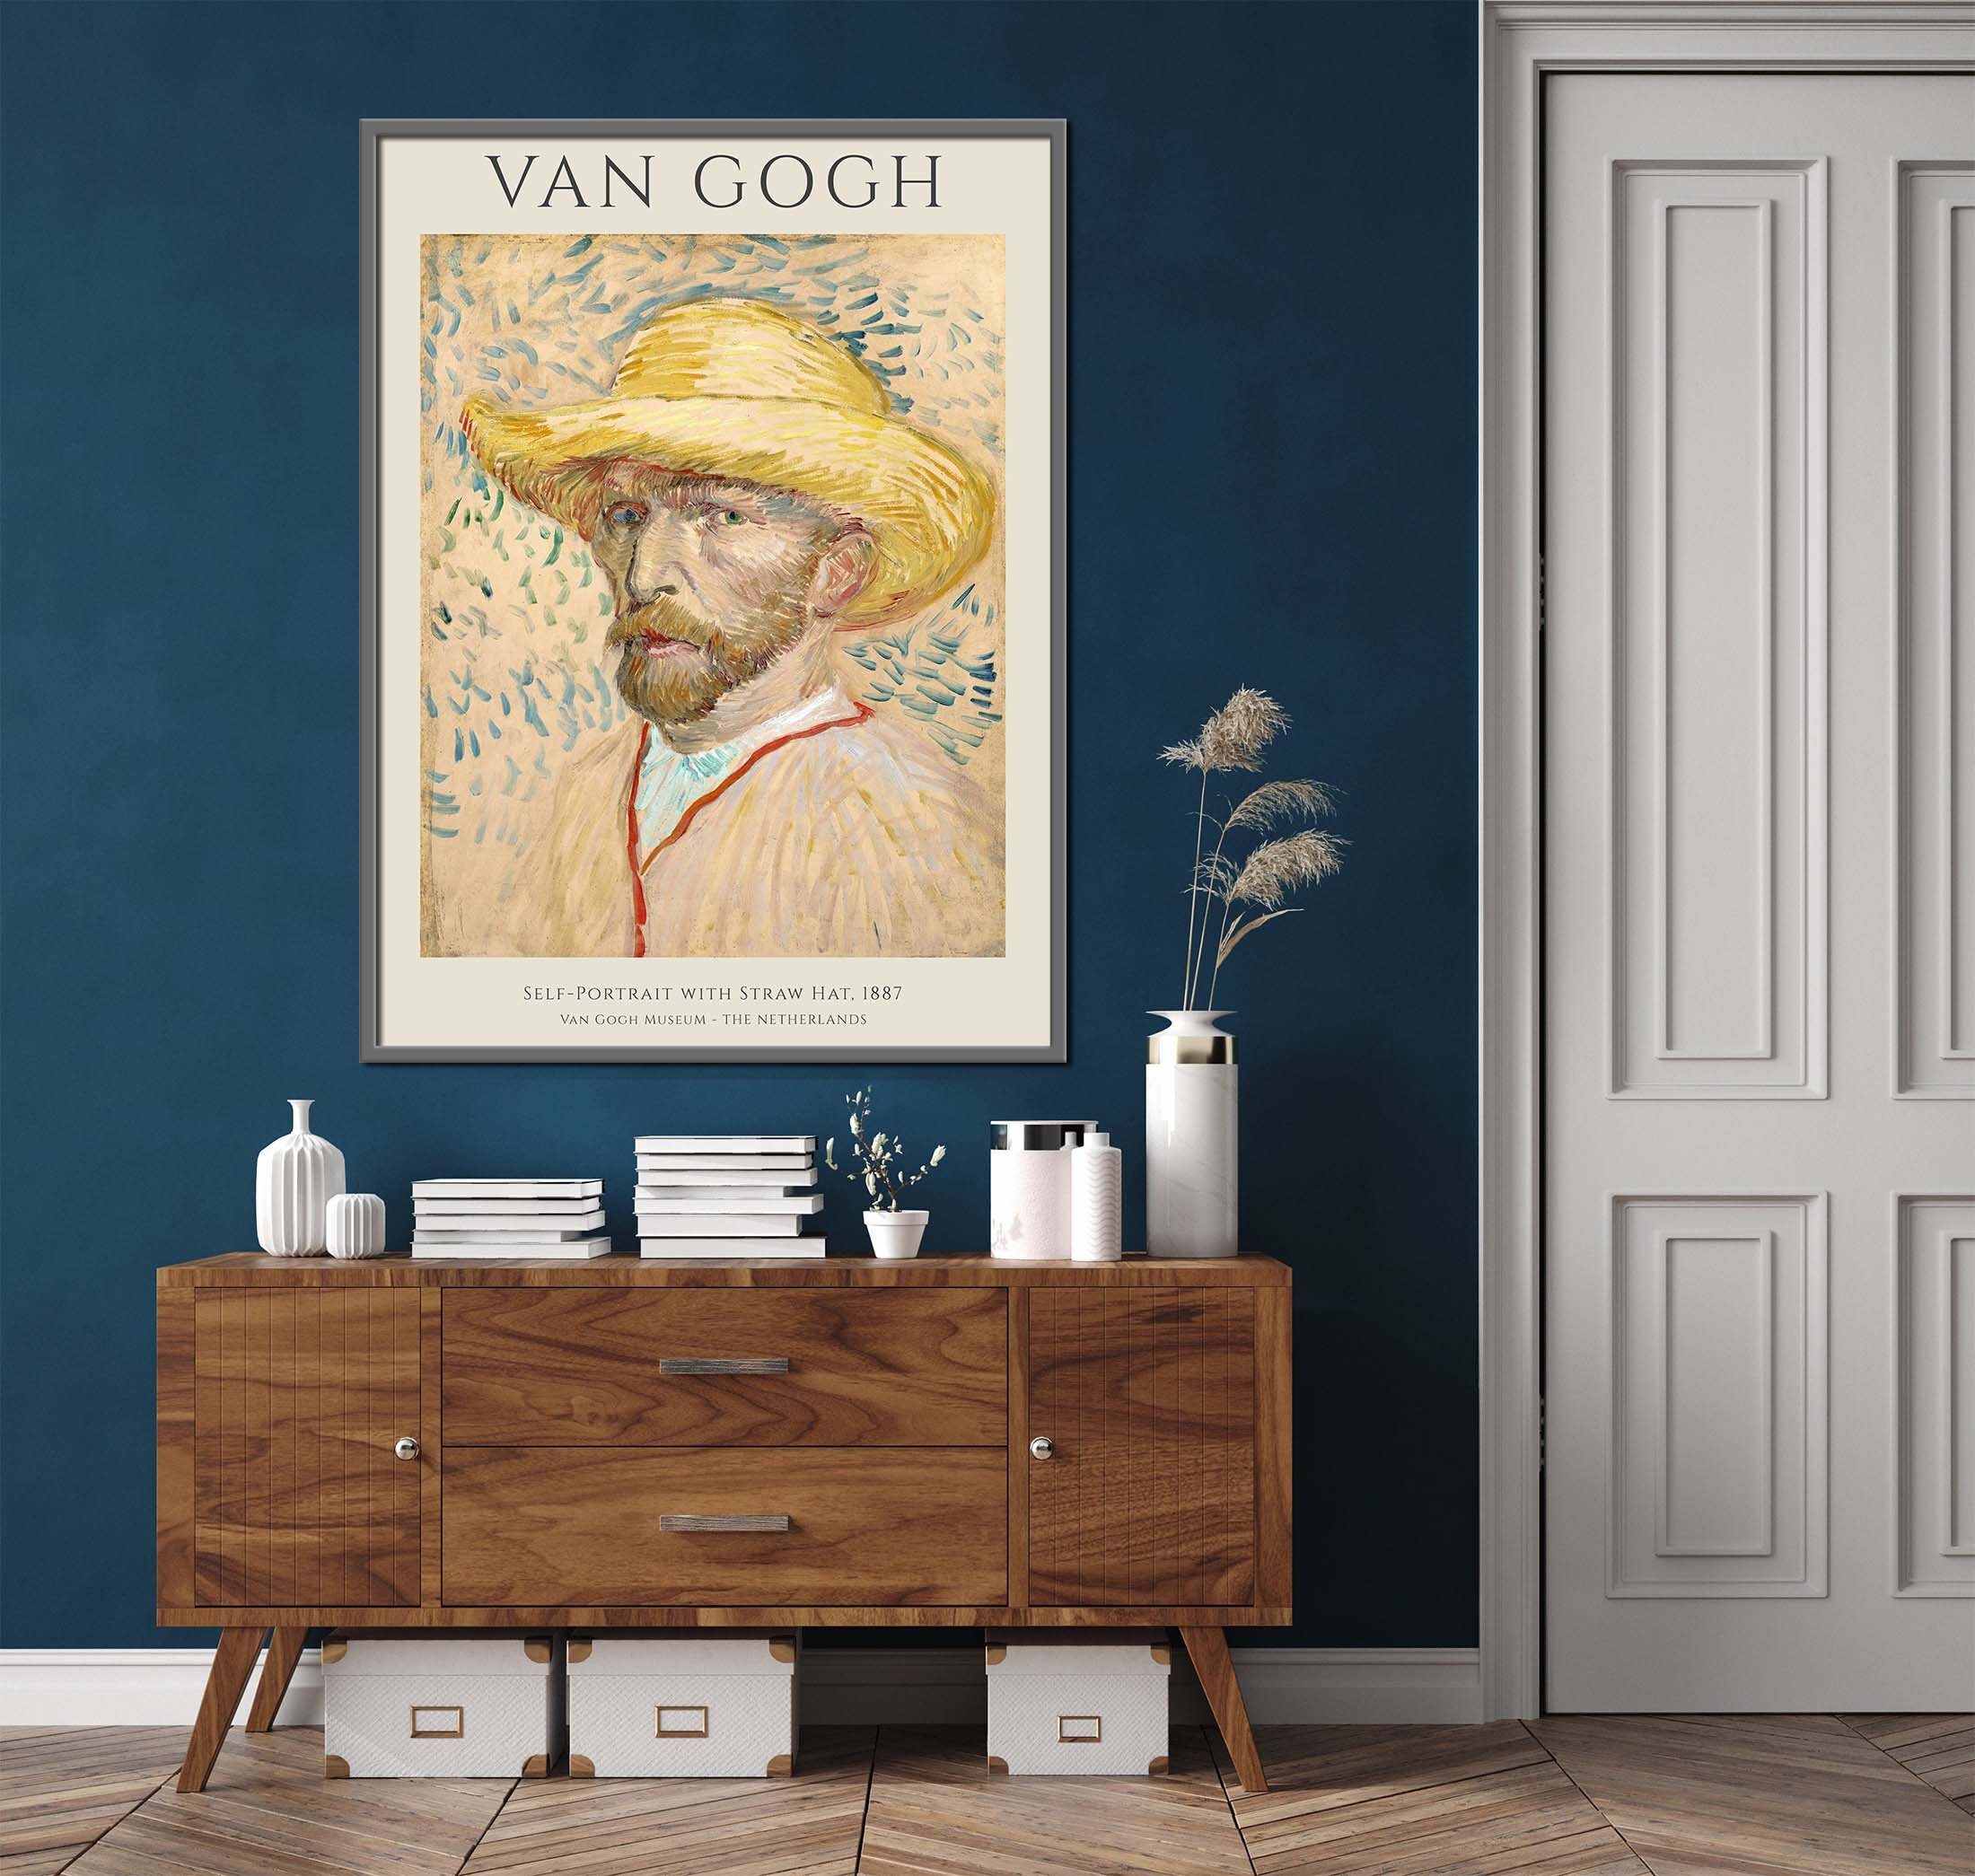 Vincent Van Gogh Poster Self Portrait With a Straw Hat - Etsy